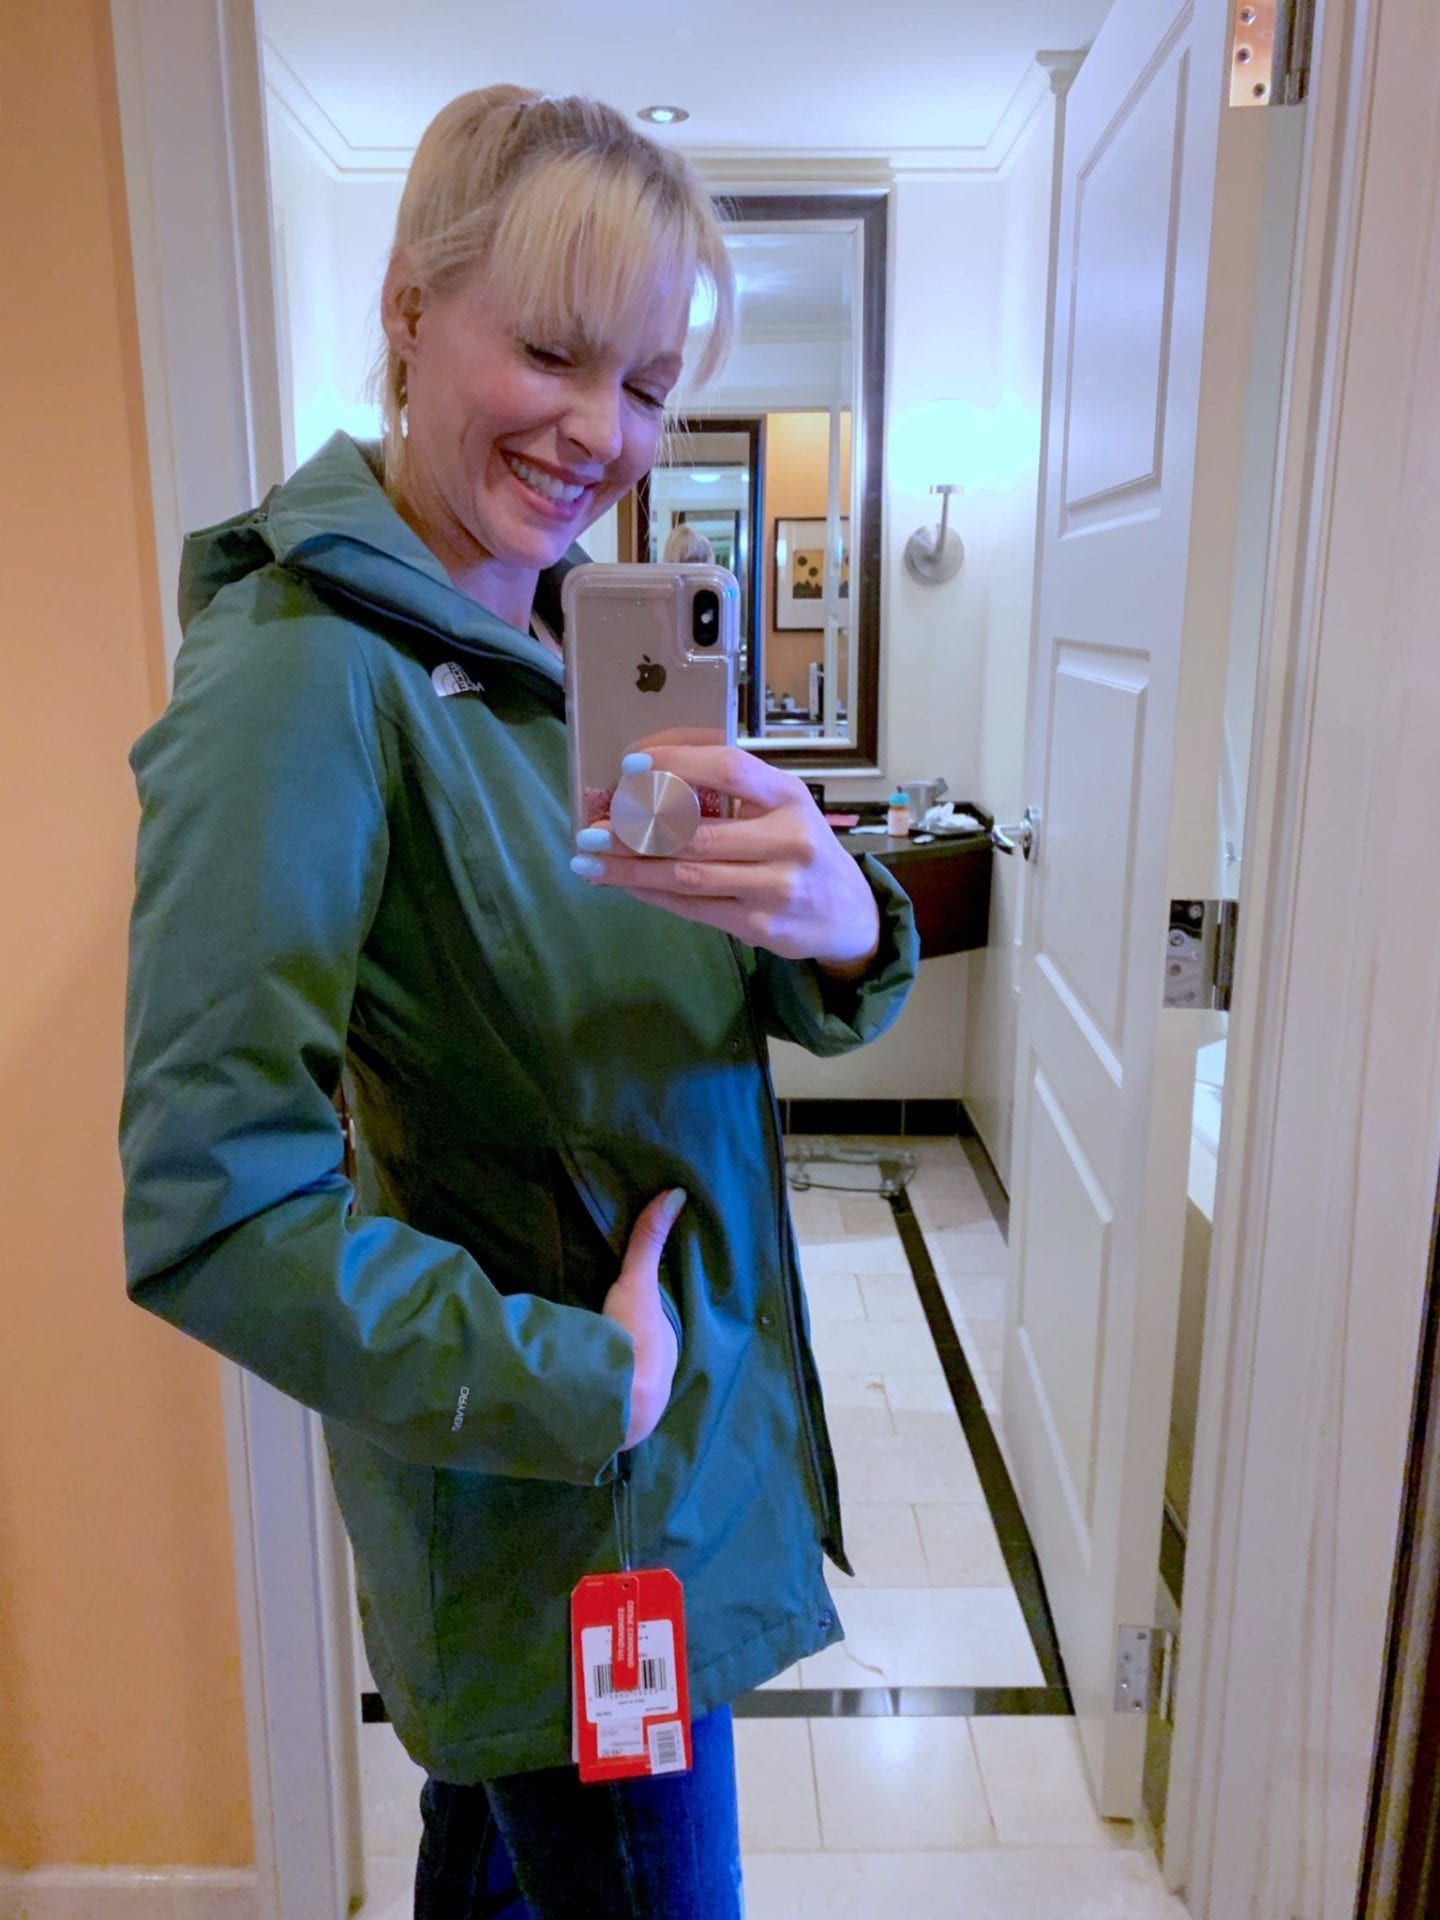 Womens North Face Jacket on Sale. Green long North Face jacket with hood at Nordstrom Anniversary Sale.